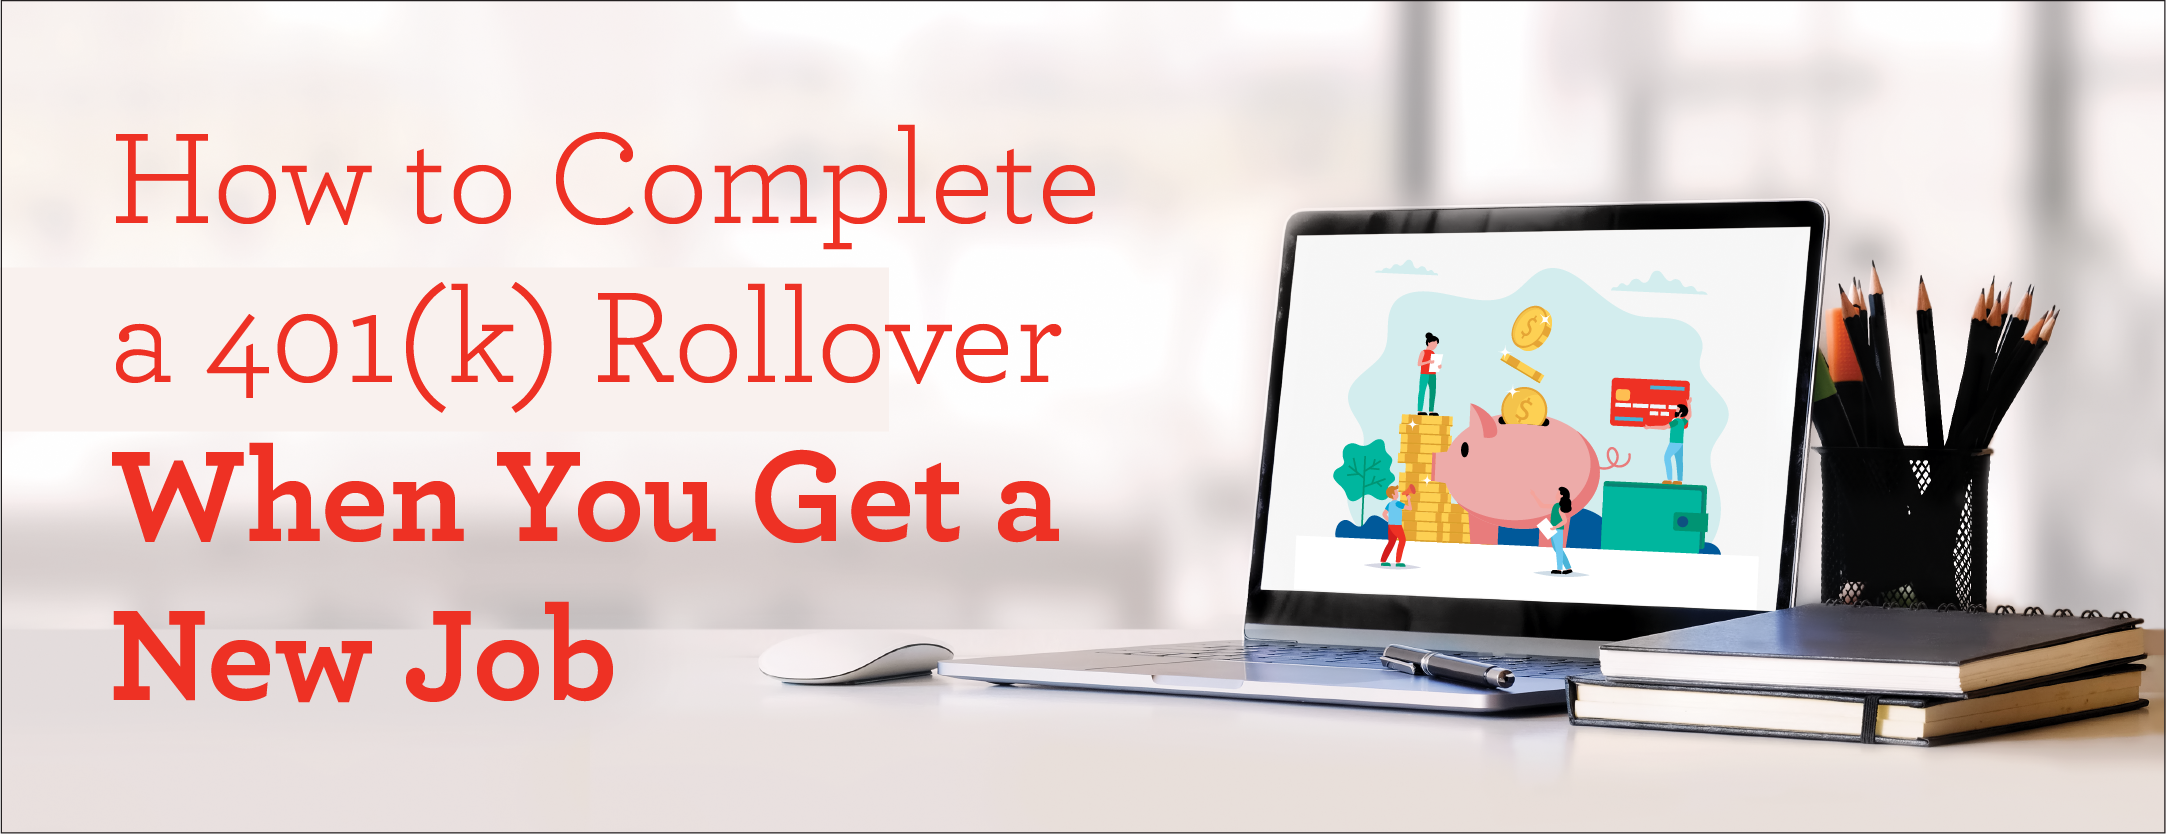 How to Complete a 401(k) Rollover When You Get a New Job header image